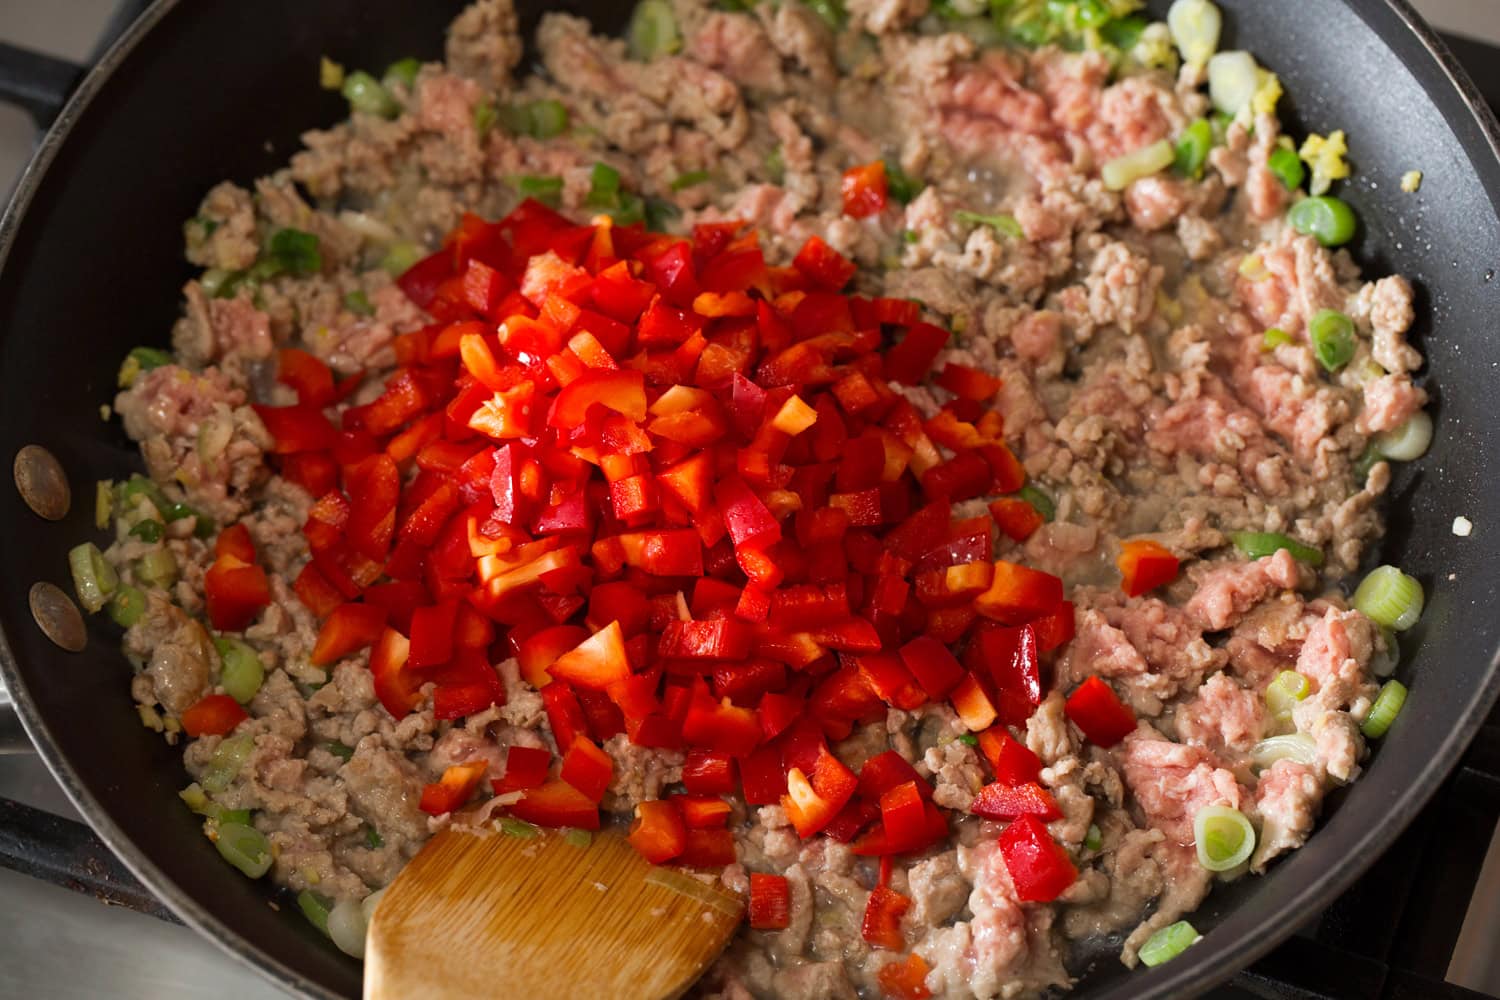 Chopped bell peppers being added to the ground meat in the skillet.